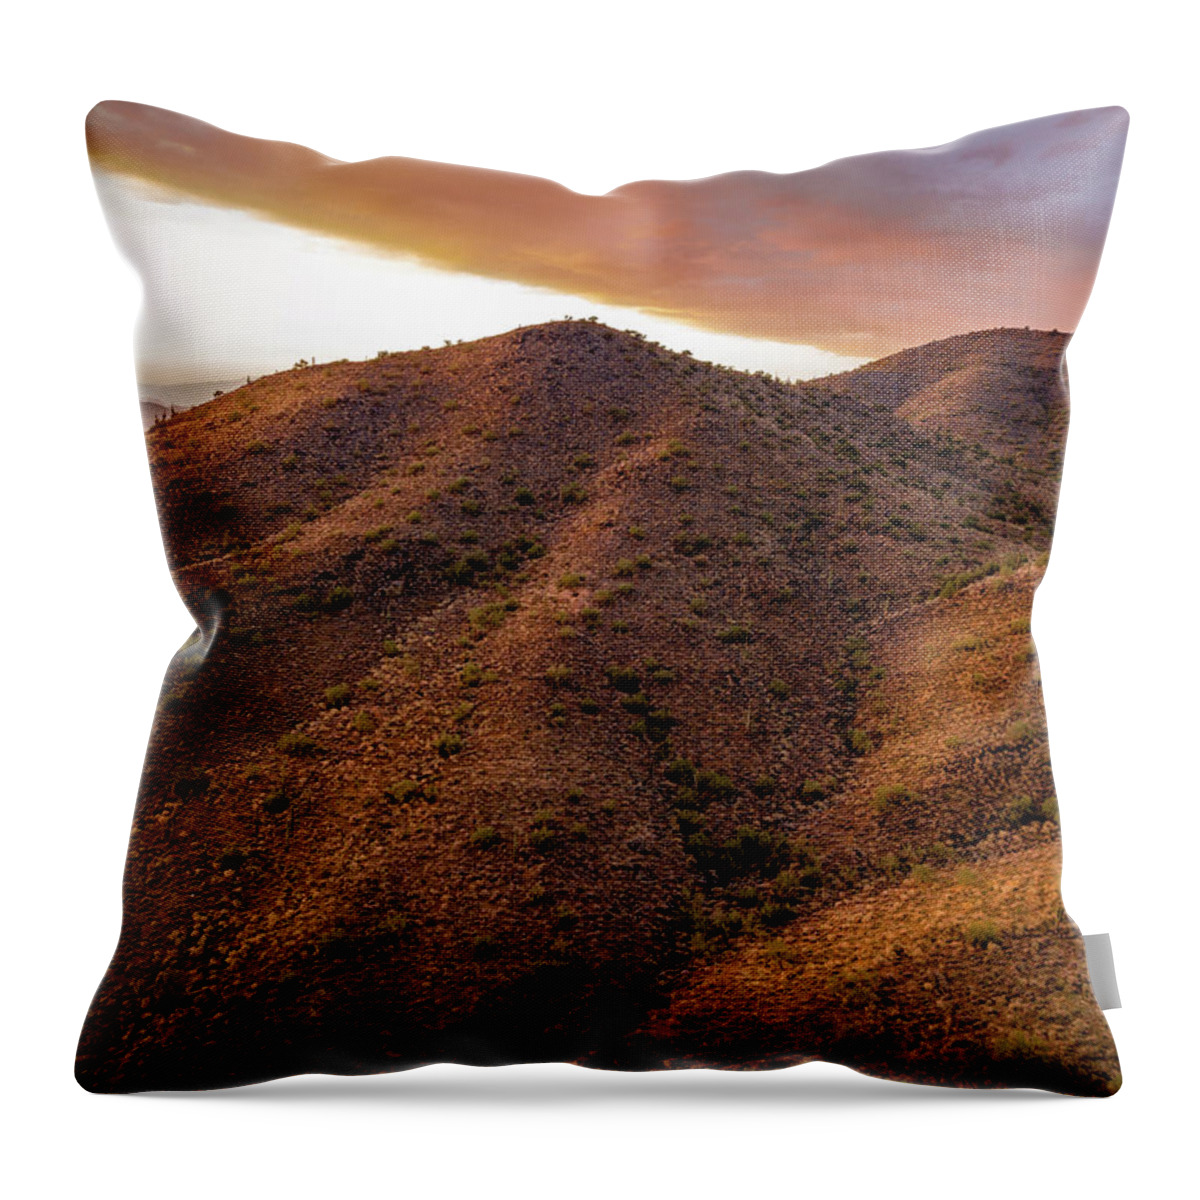 Drone Photography Throw Pillow featuring the photograph An Imposing Presence by David Stevens